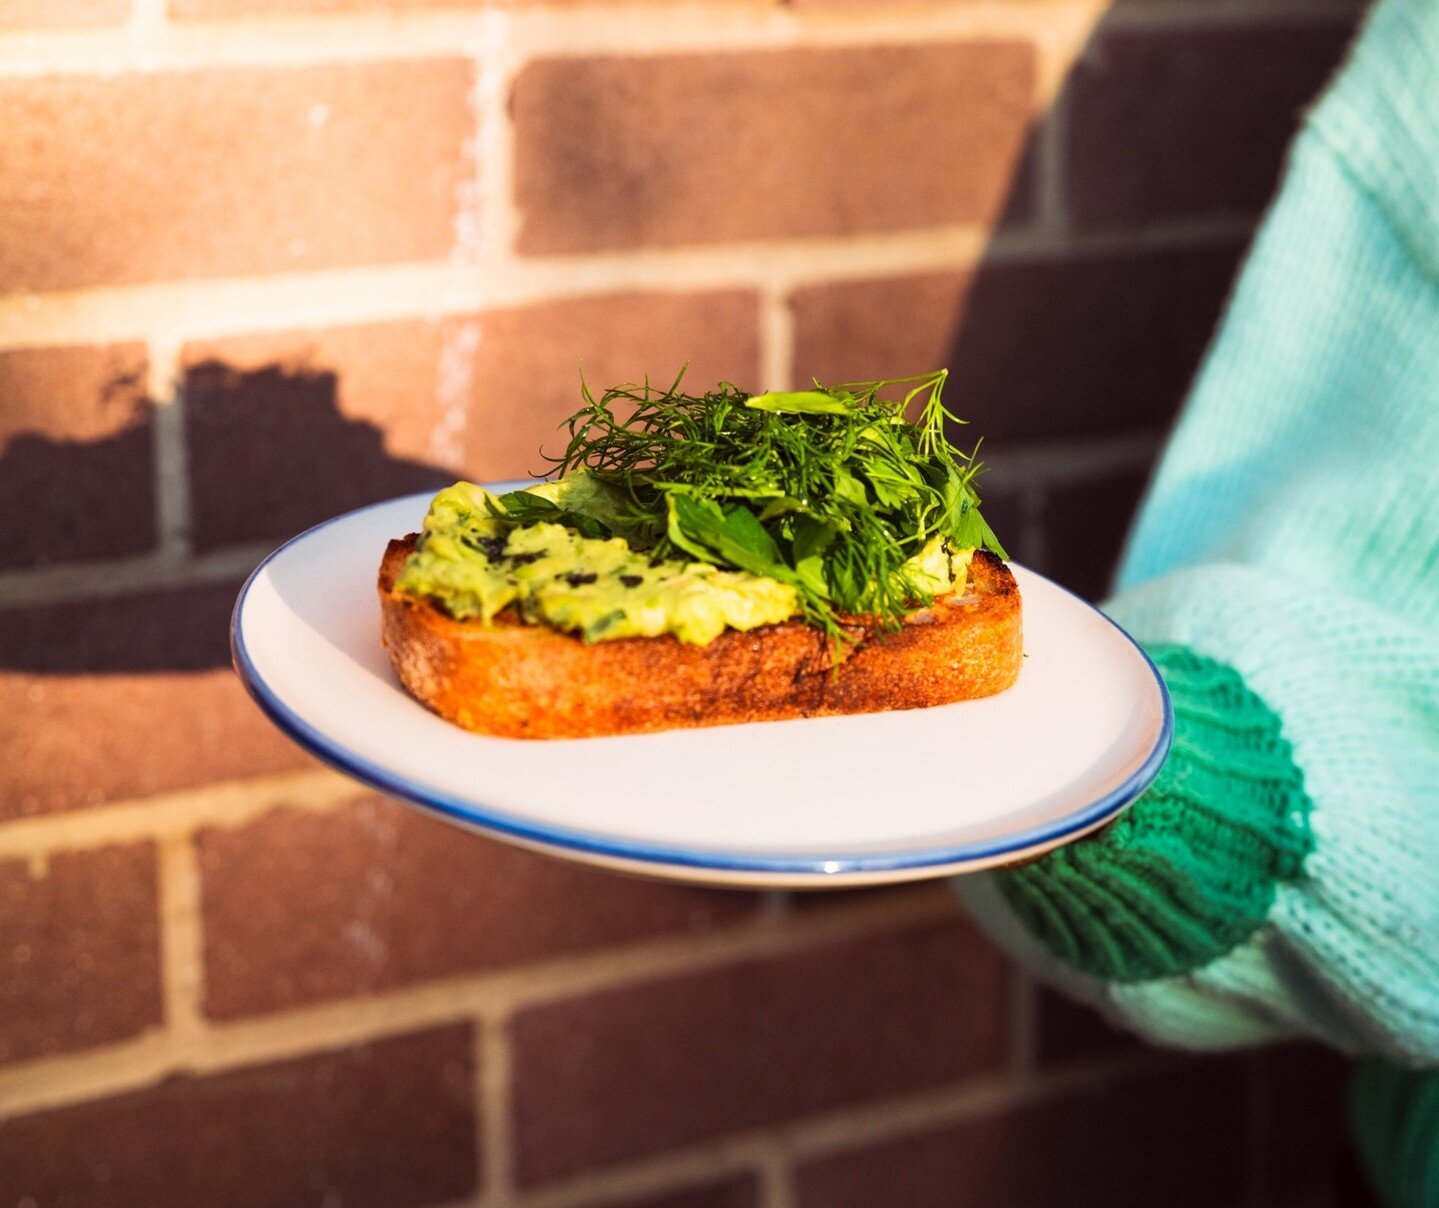 Avo on toast classic, in the sun, with a cuppa. Yep, that'll do it.